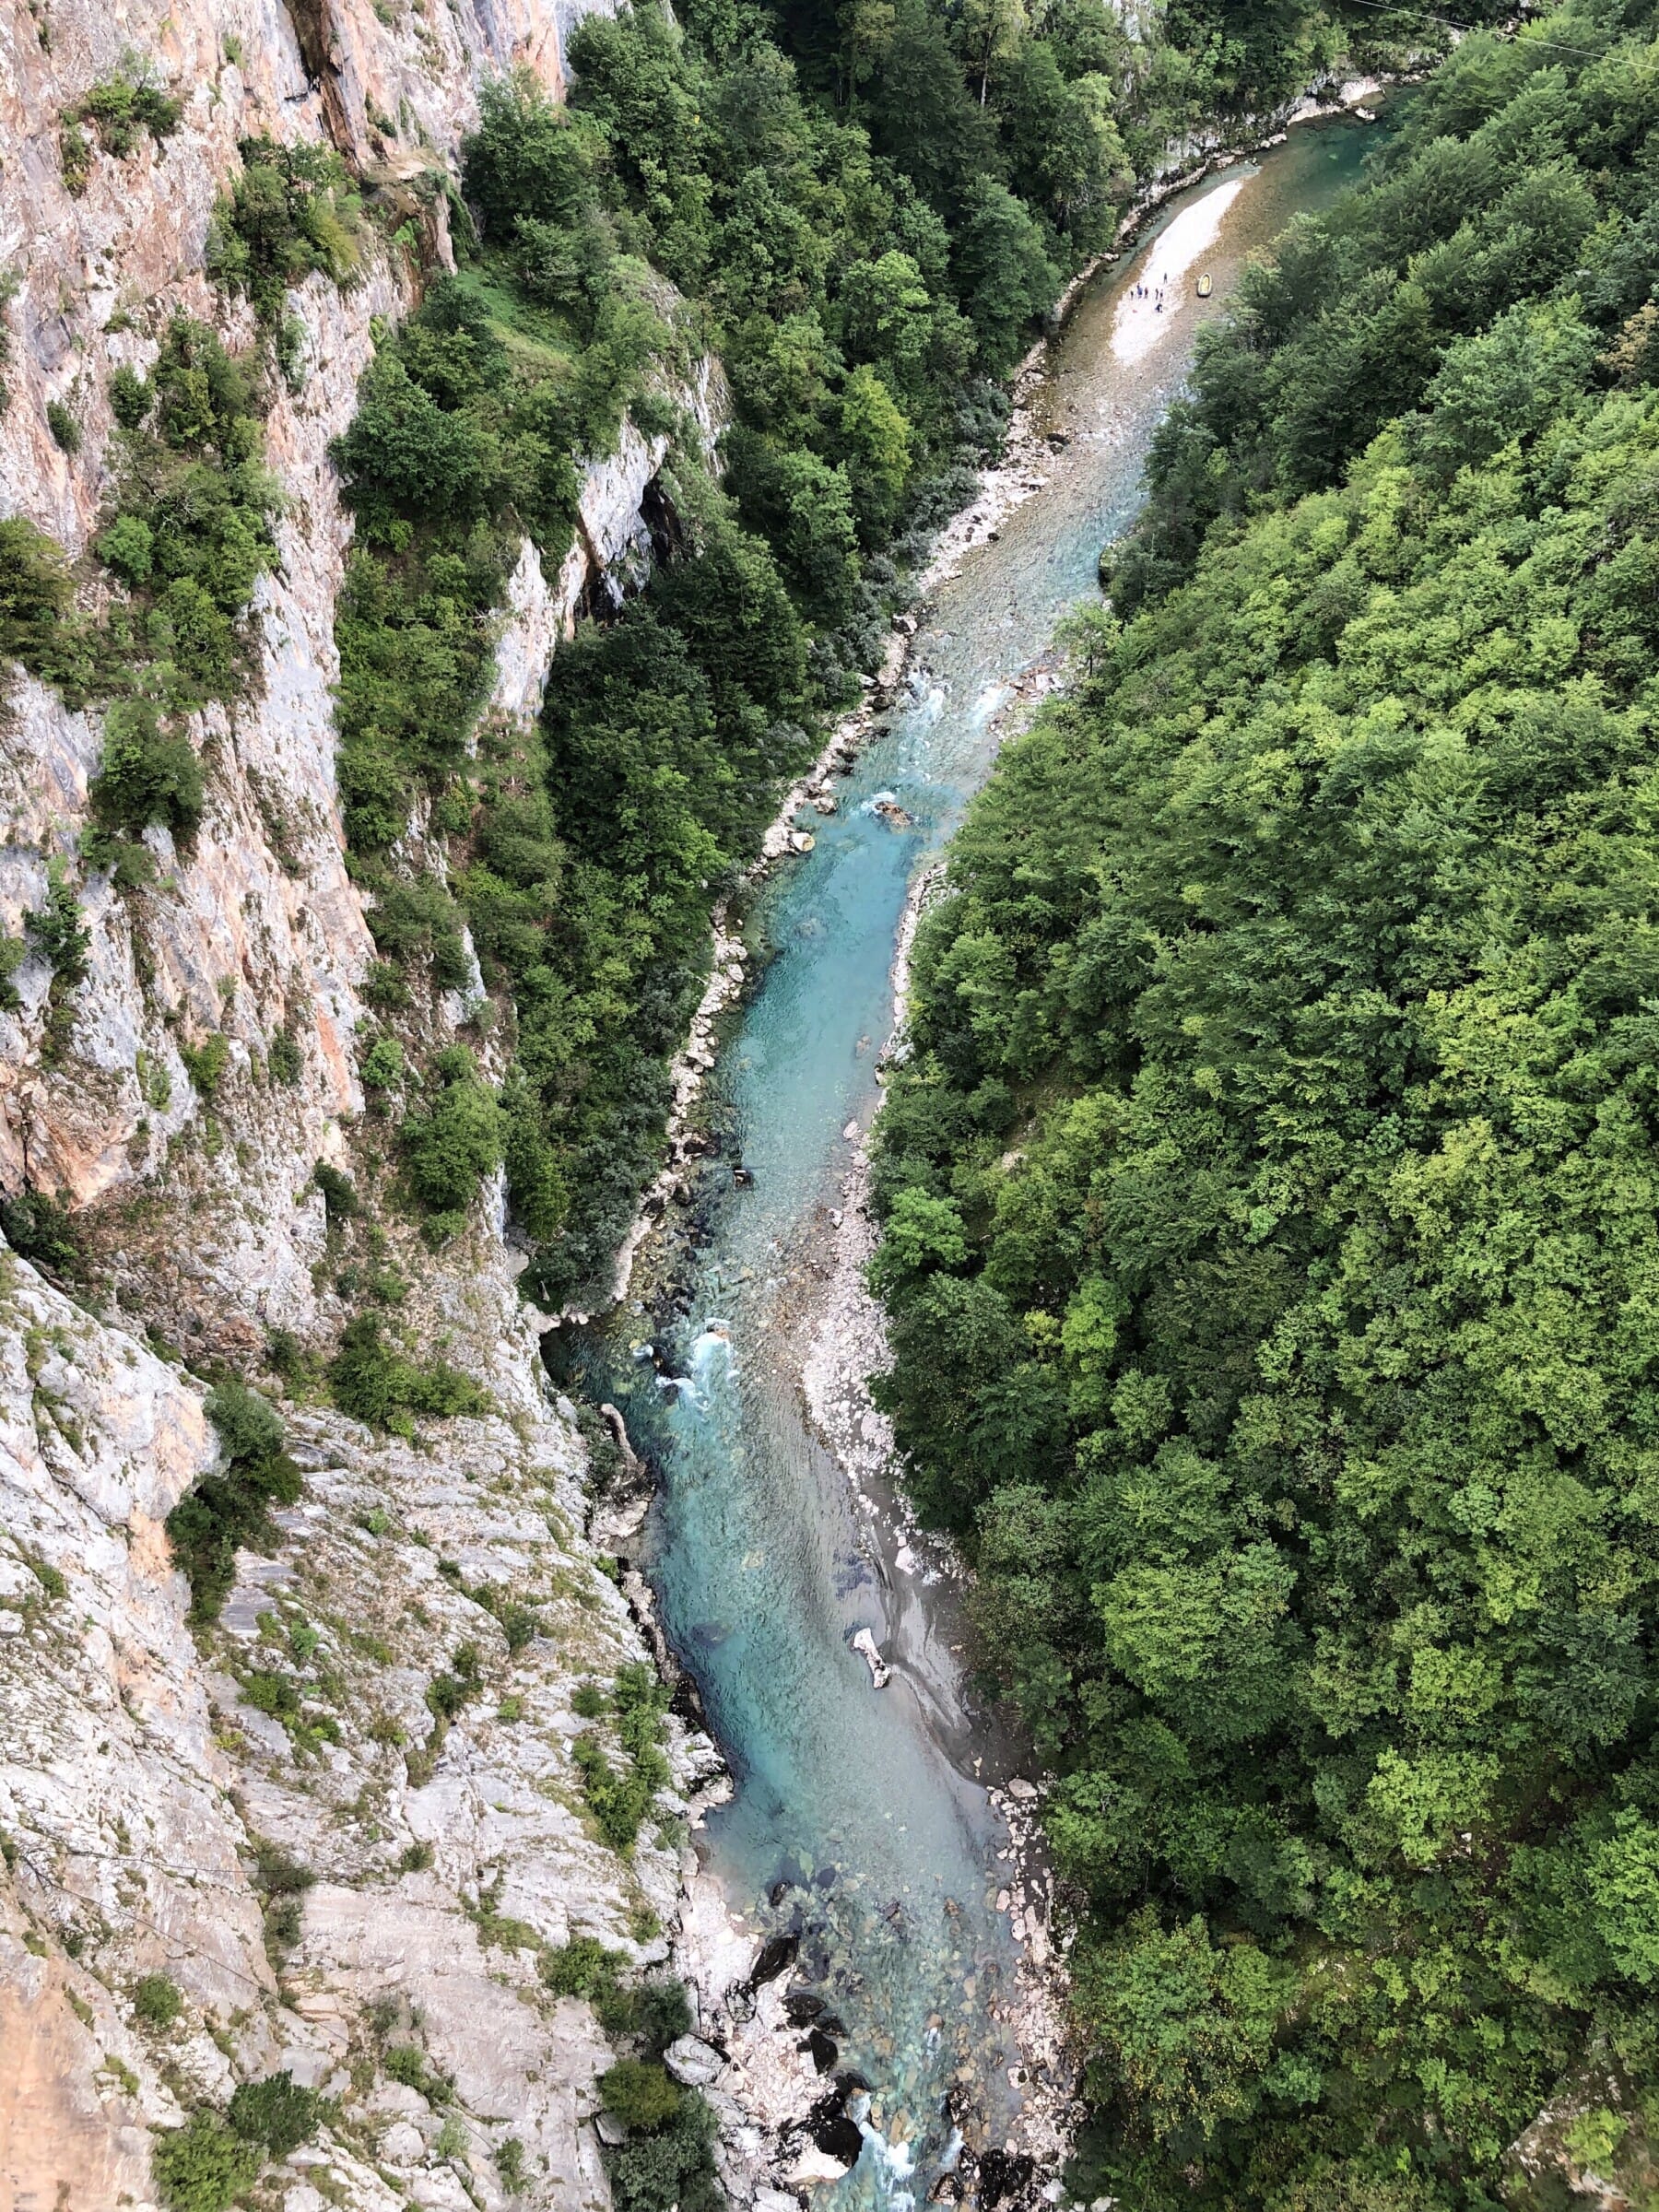 The second depeest canyon in the world with the crystal slear water